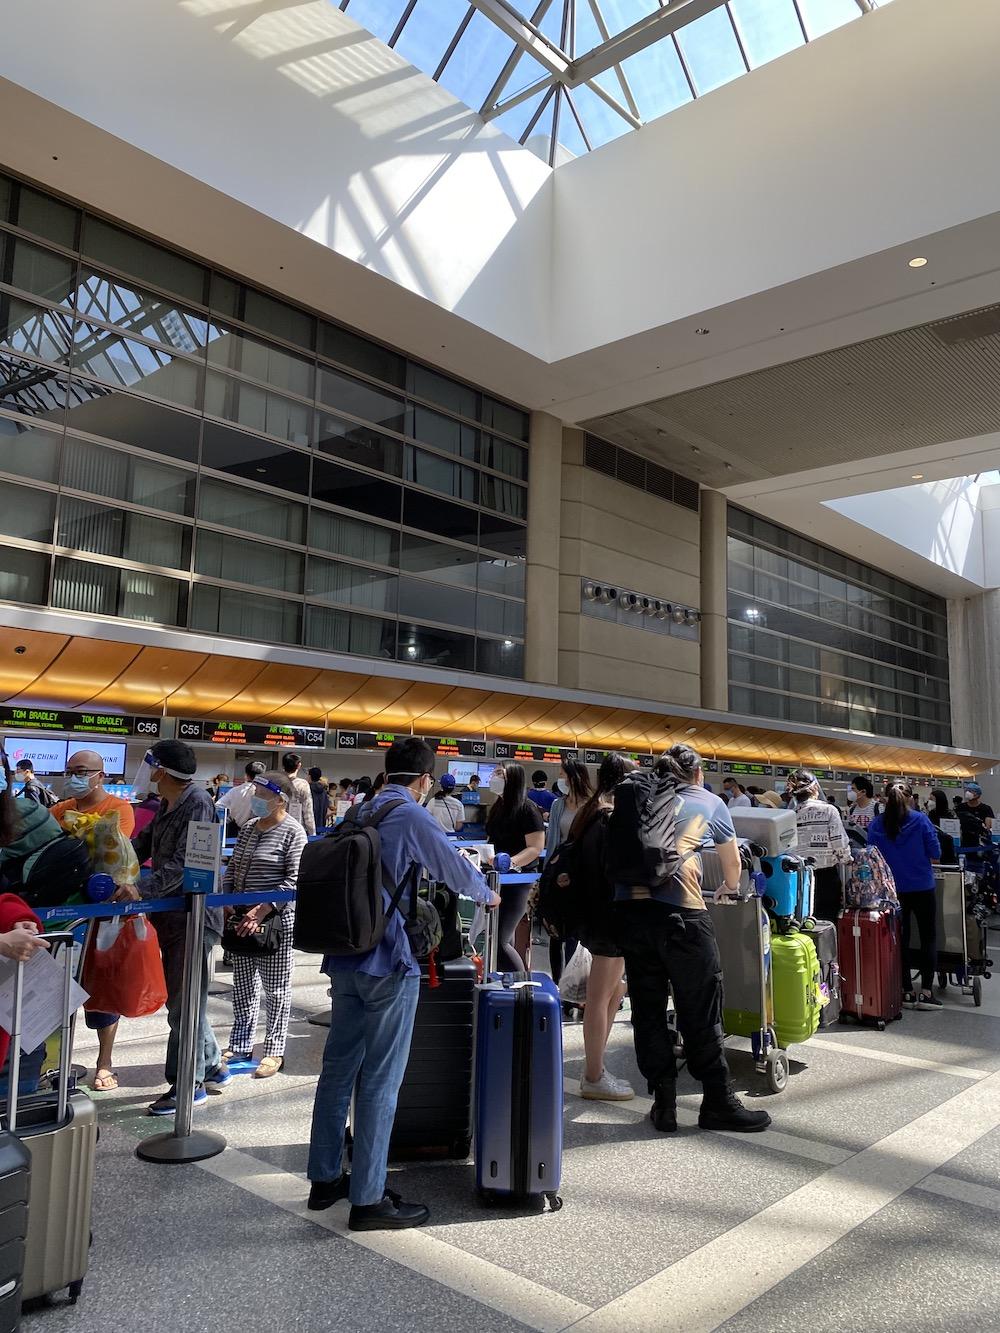 Travelers stand in line with their luggage inside the Los Angeles International Airport on Aug. 16 at 10:35 a.m. They waited to check in their suitcases and receive their boarding passes.